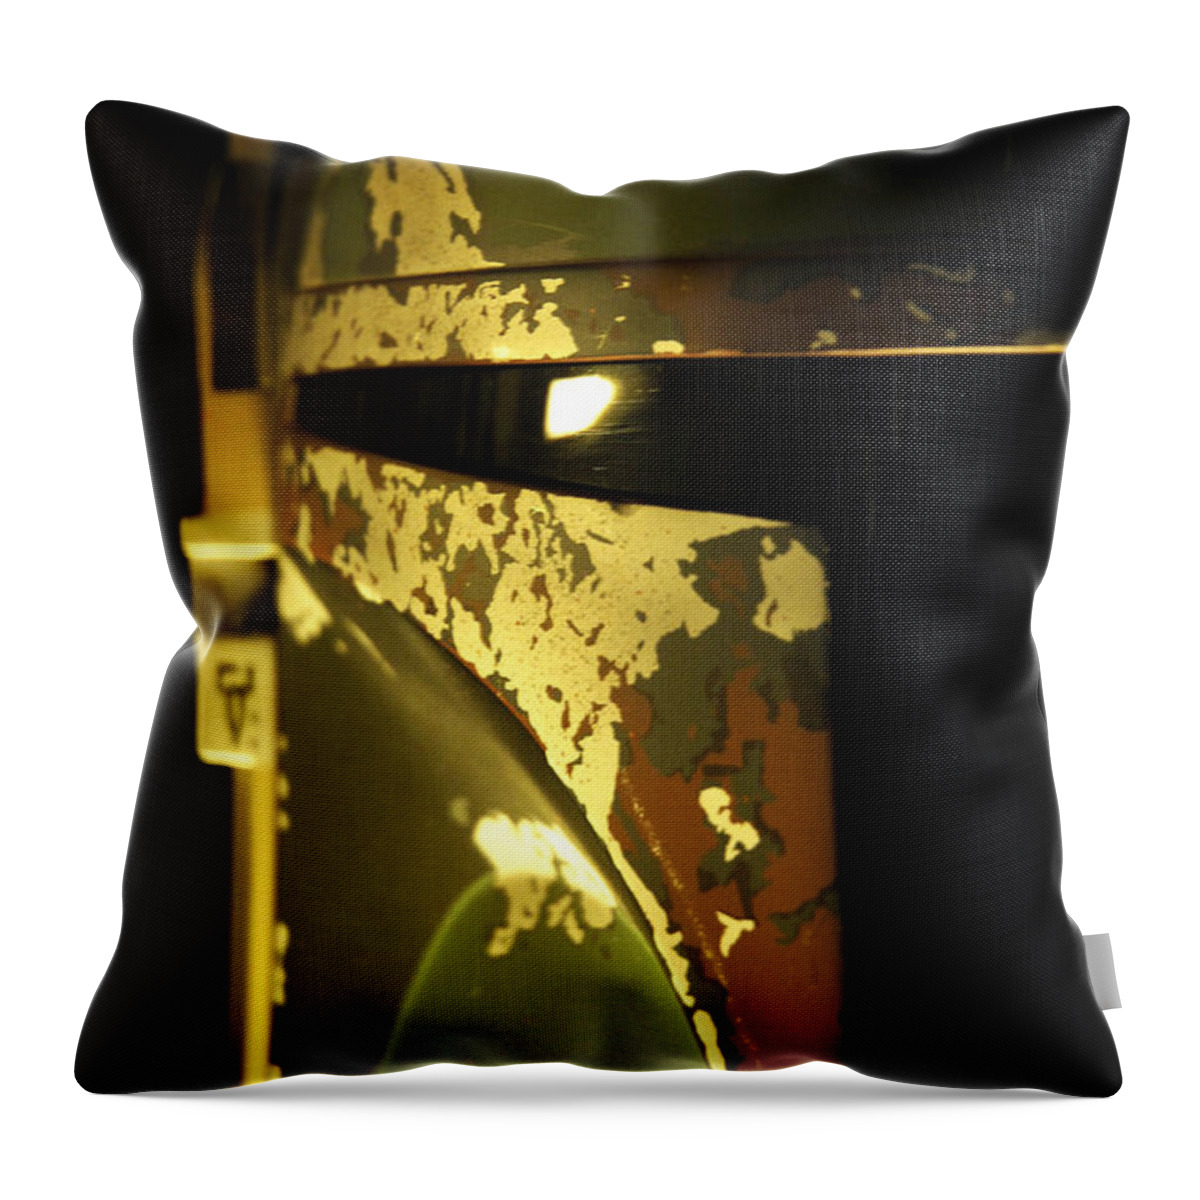 Boba Throw Pillow featuring the photograph Boba Fett Helmet 139 by Micah May